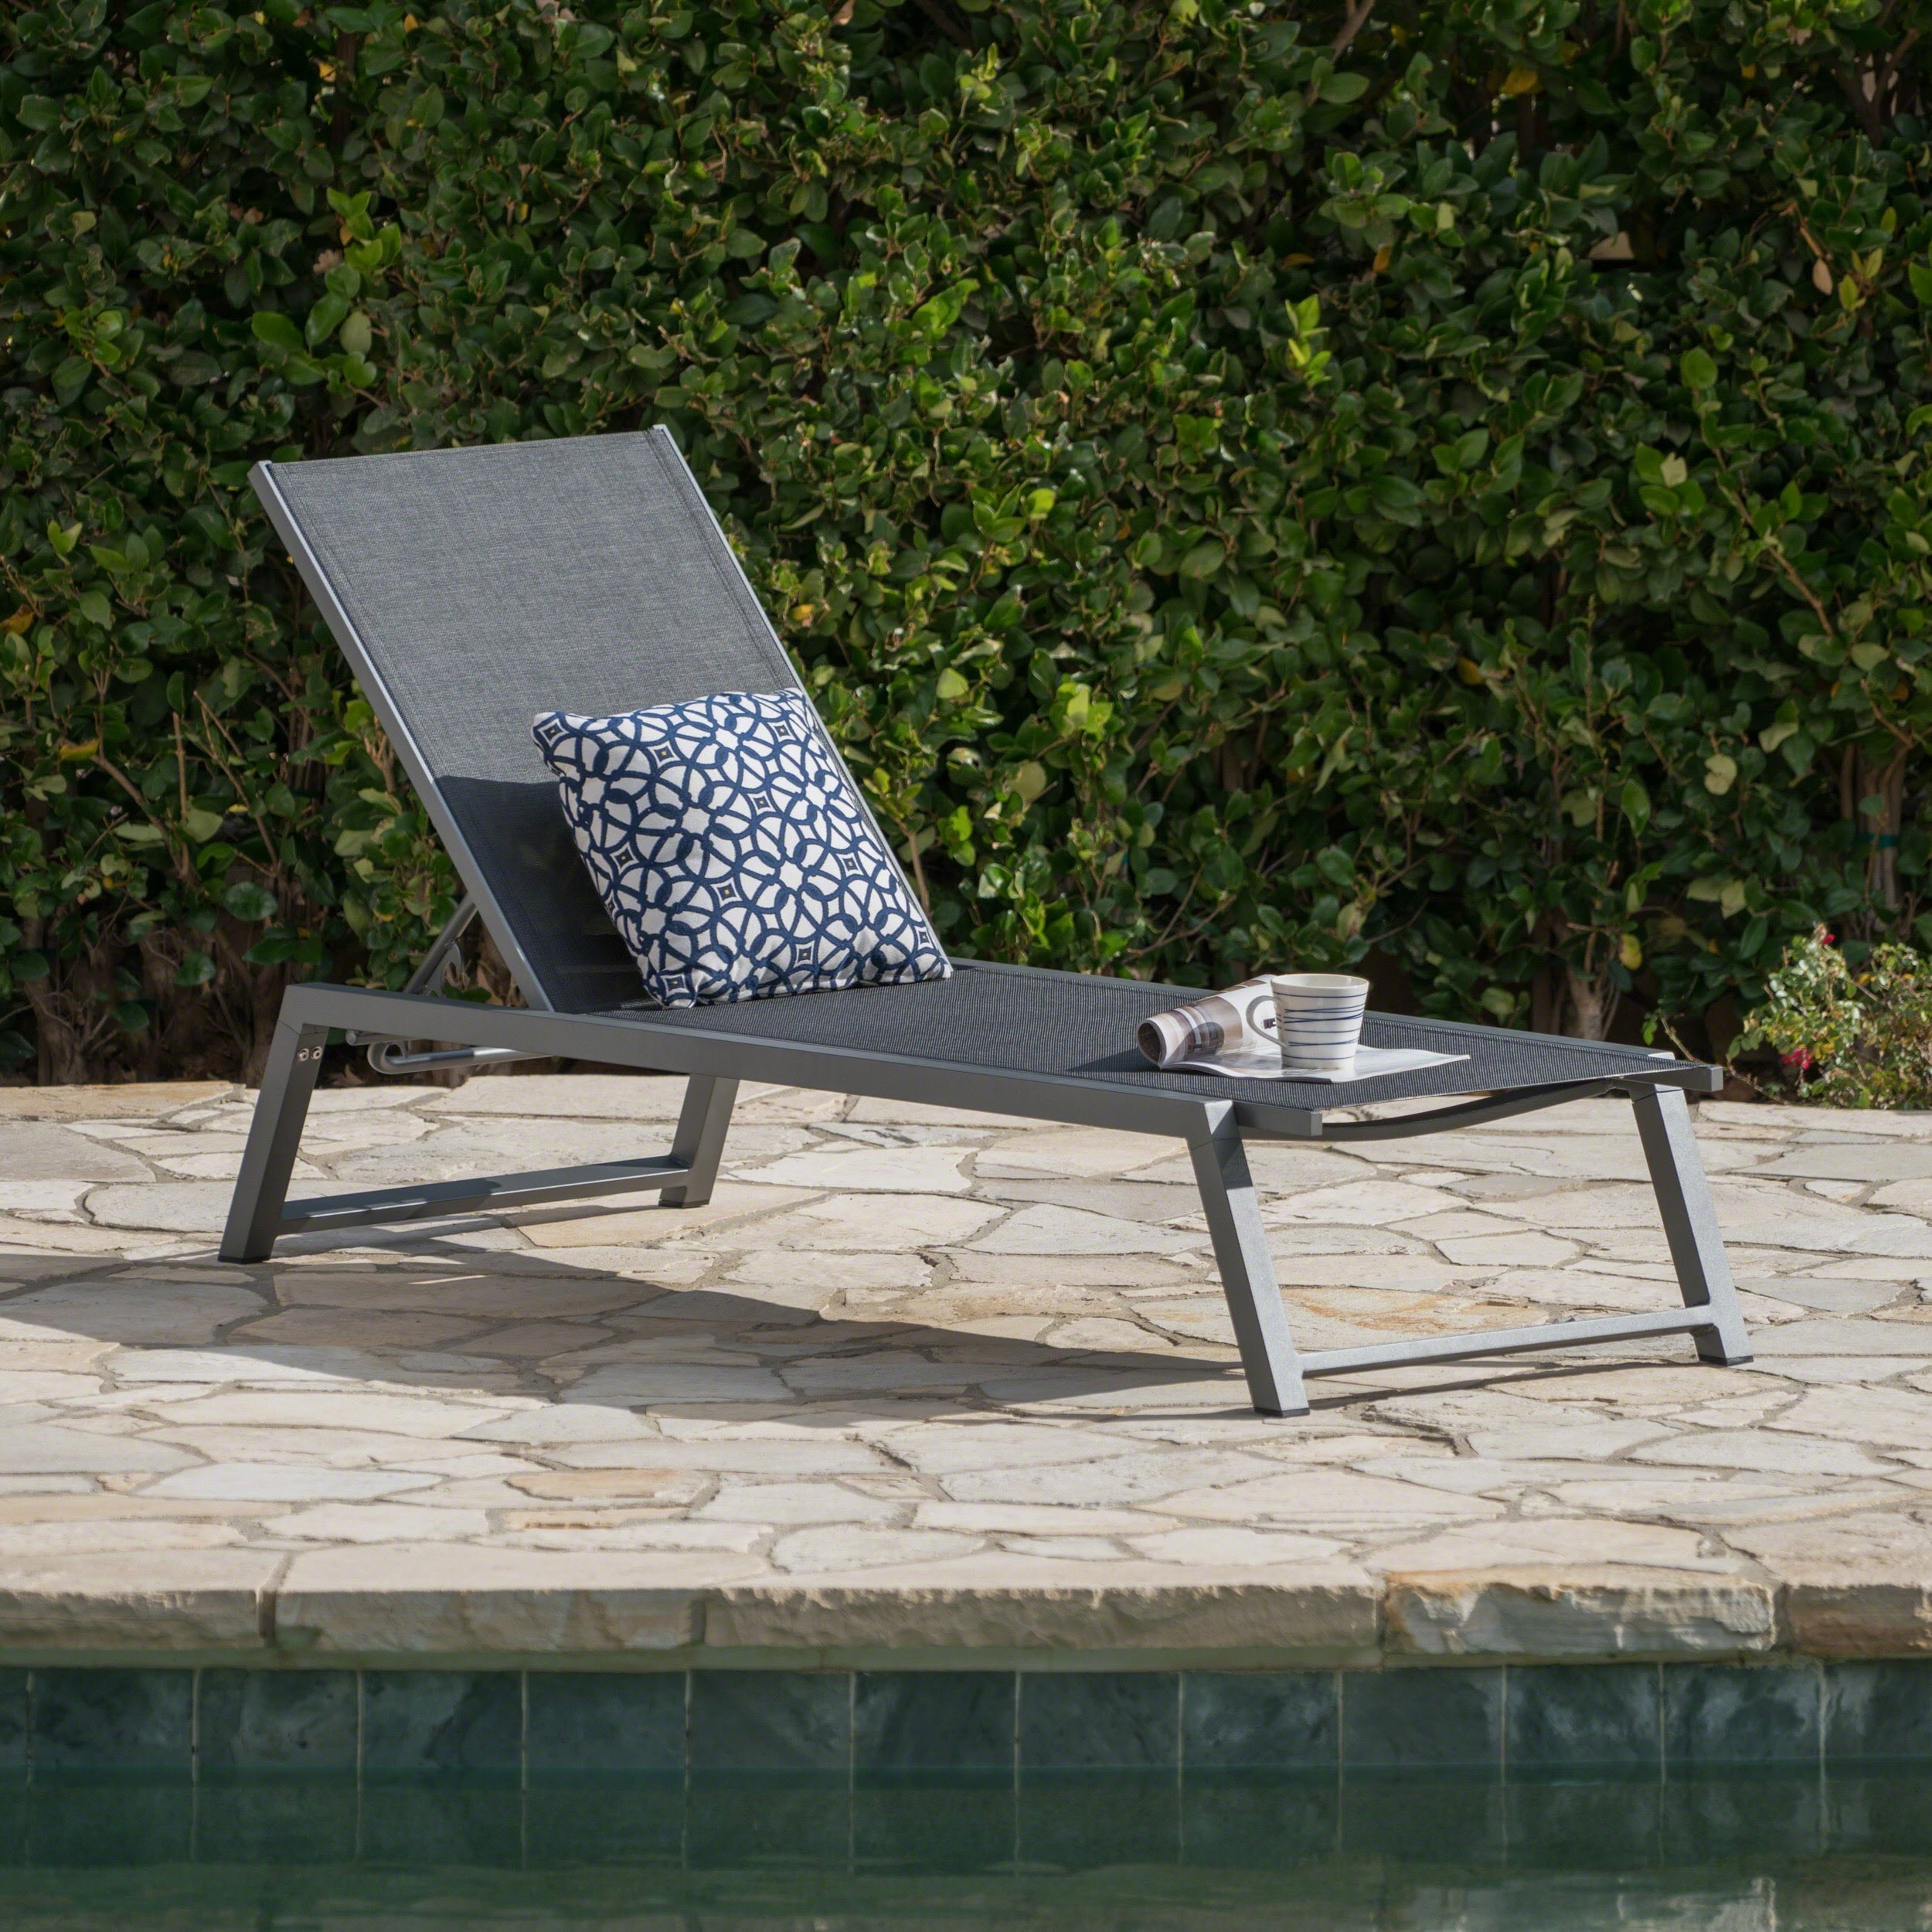 Matthewortile.com Chaise Lounge - Shop For Myers Outdoor ...